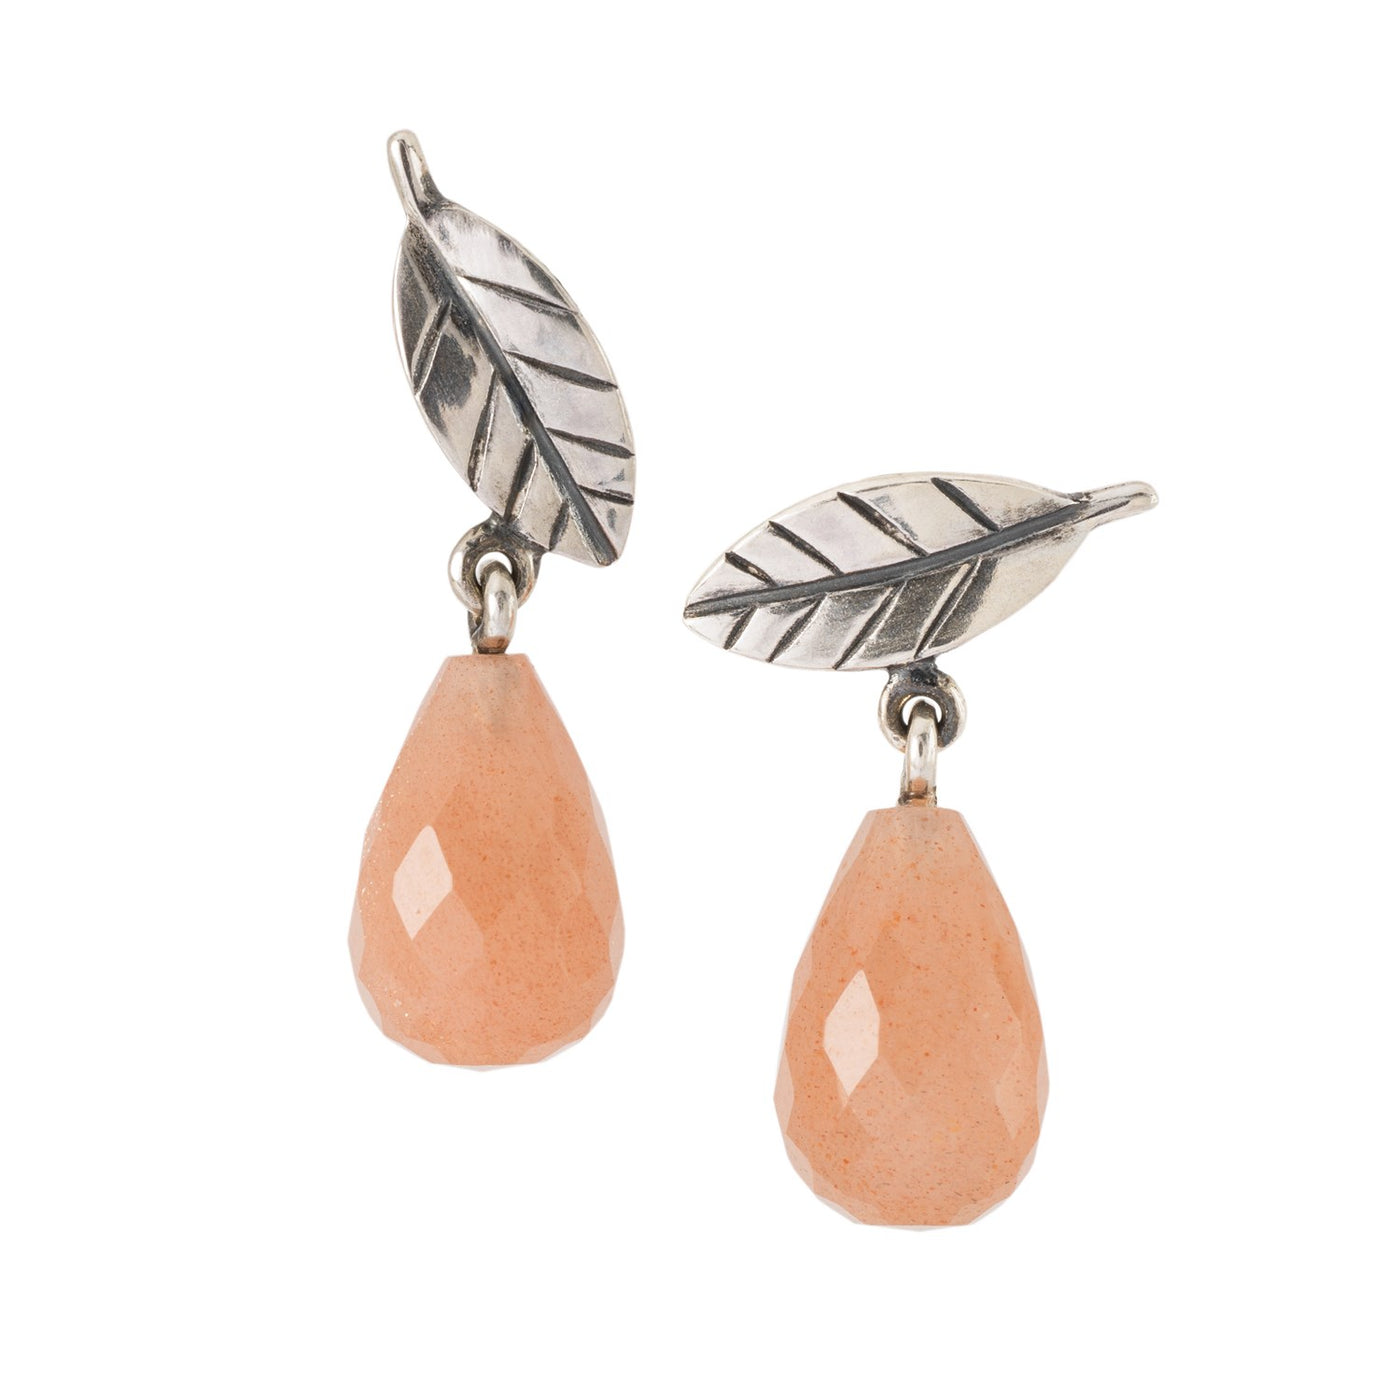 Stylish silver studs with an intricate design featuring delicate leaves with a drop of faceted Feldspar Moonstone hanging from it, with post backs for easy wearing.